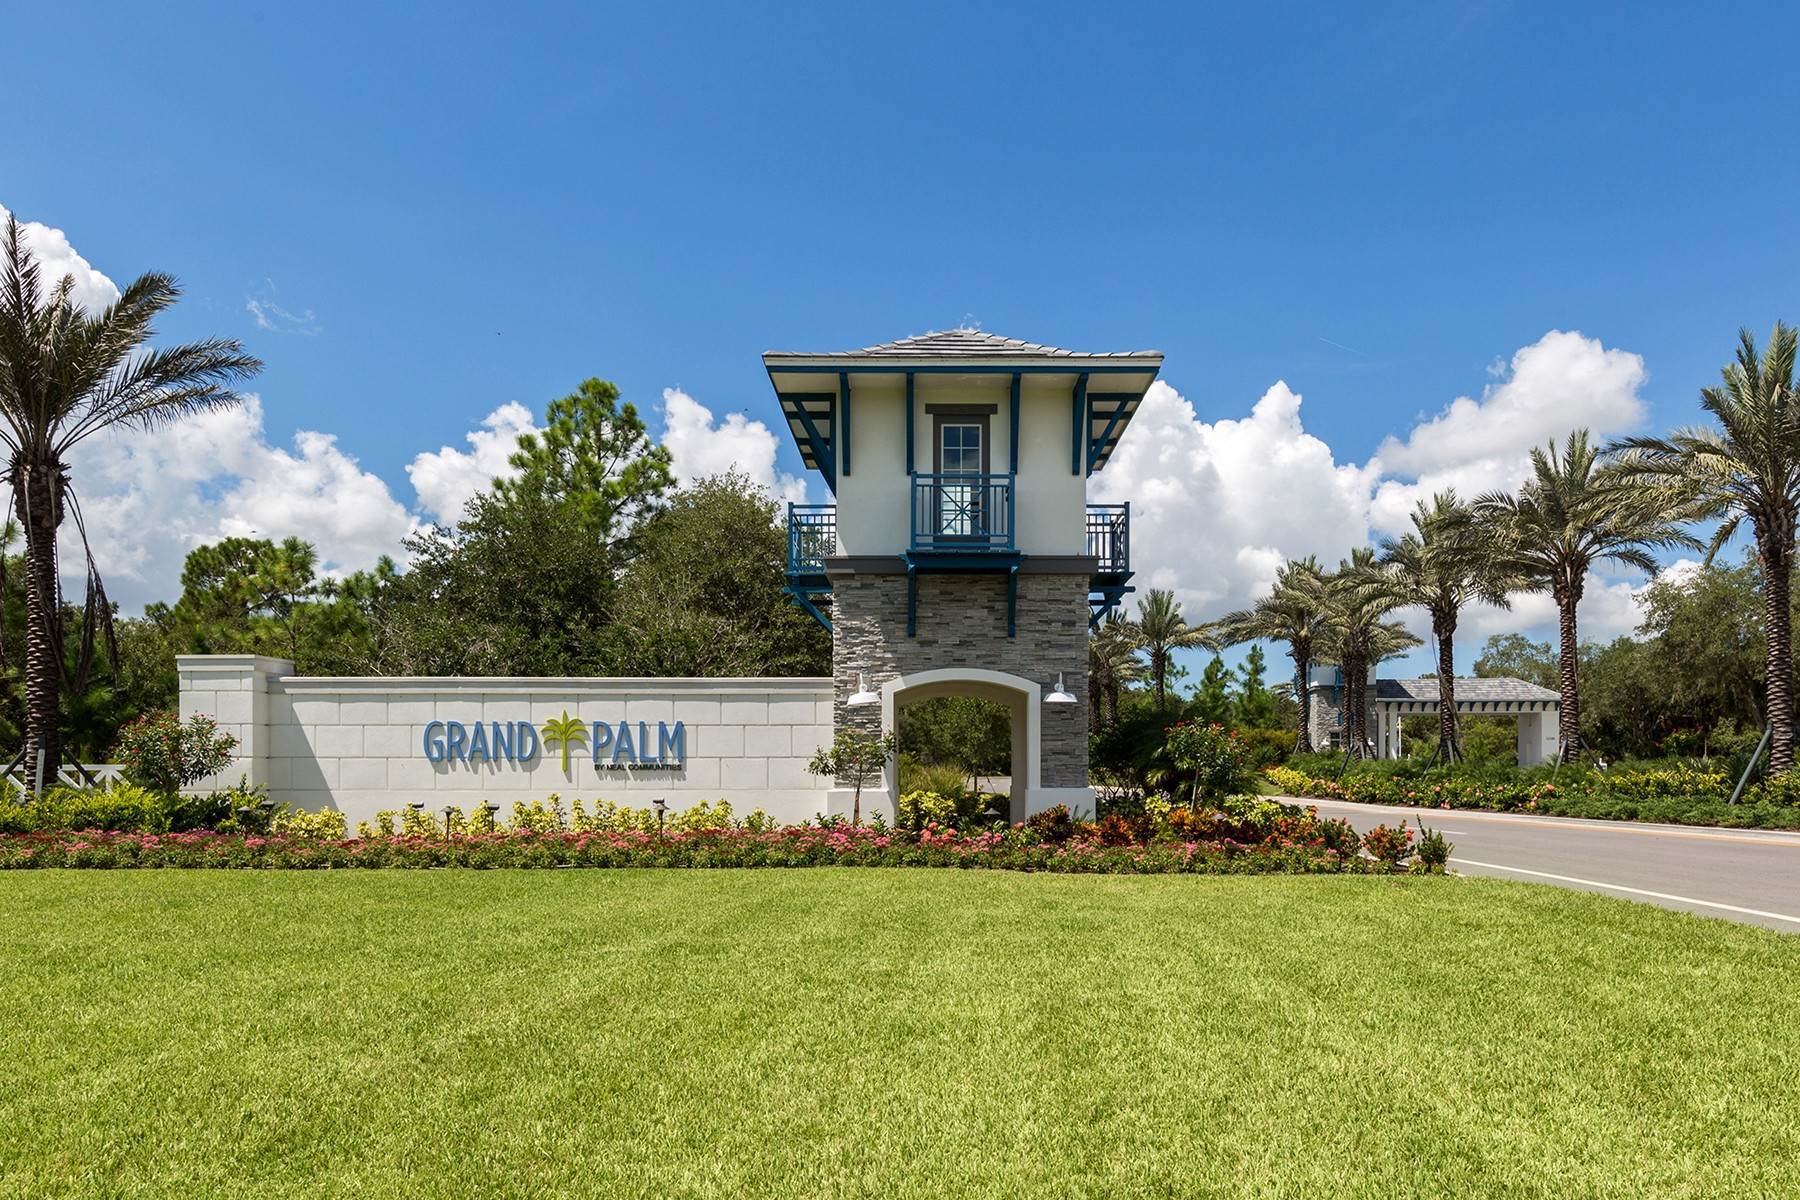 24. Single Family Homes for Sale at GRAND PALM 13017 Steinhatchee Loop Venice, Florida 34293 United States